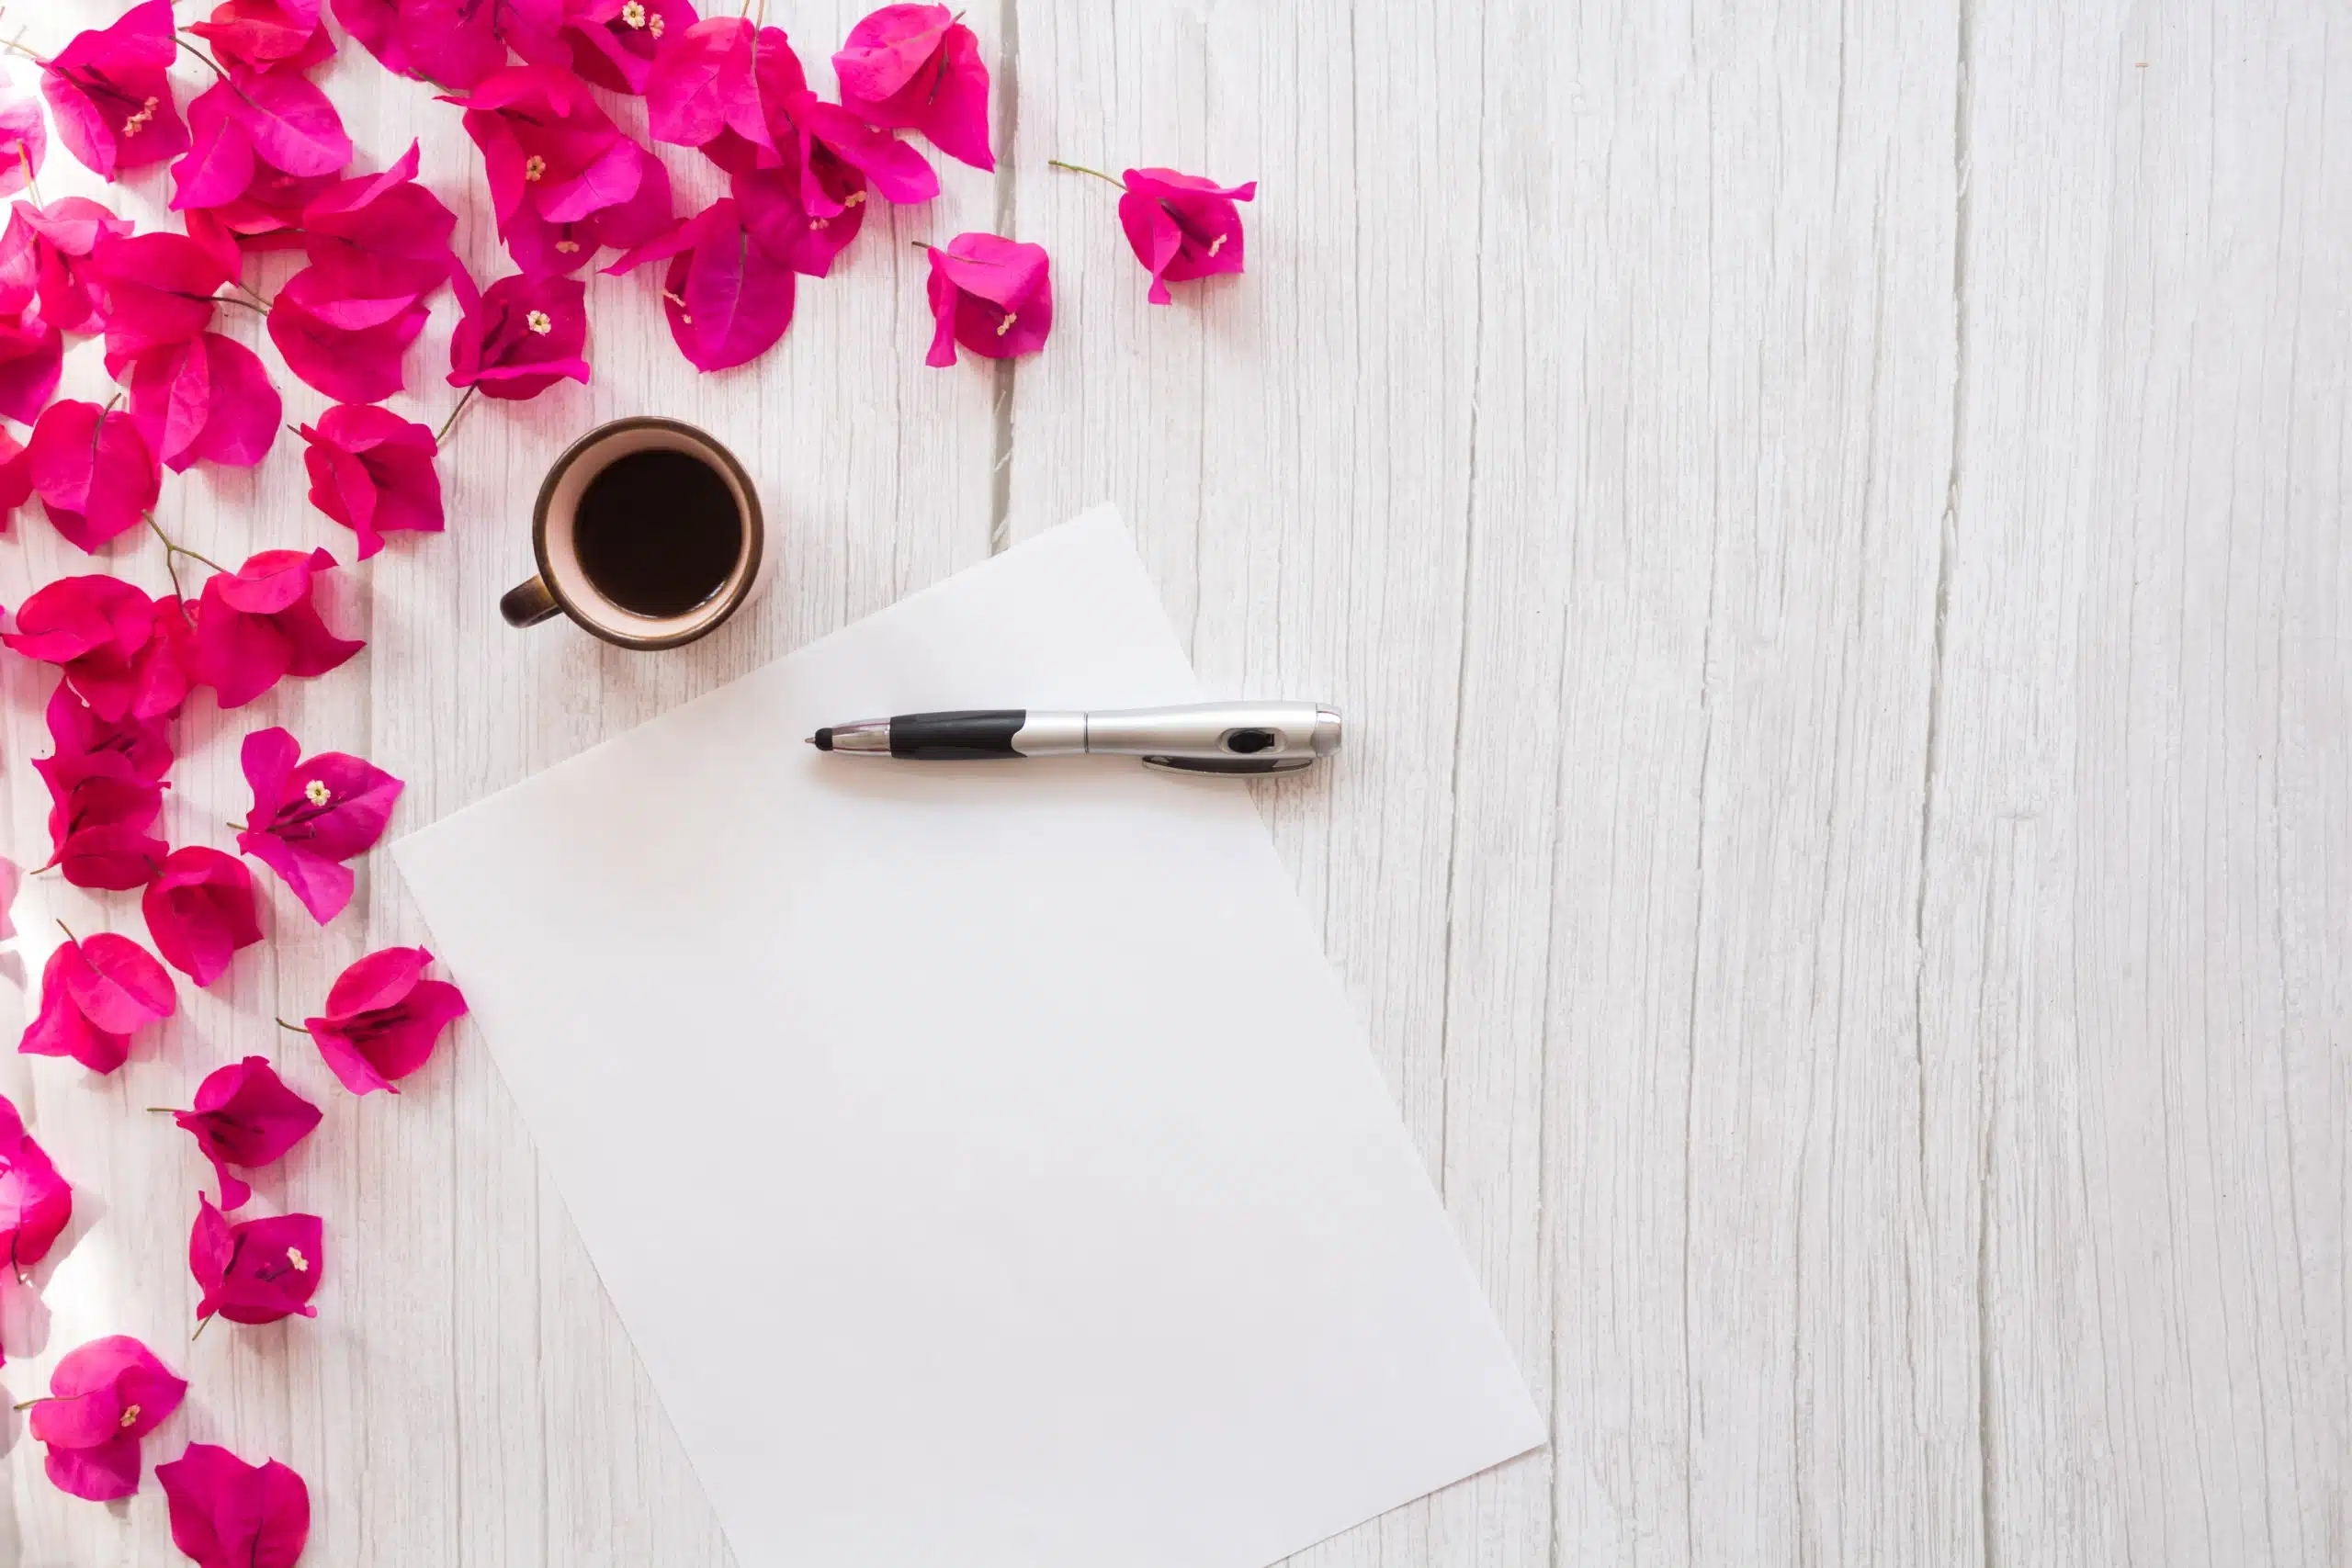 White paper with pen and a cup of tea, with bougainvillea flower petals on white wooden platform.